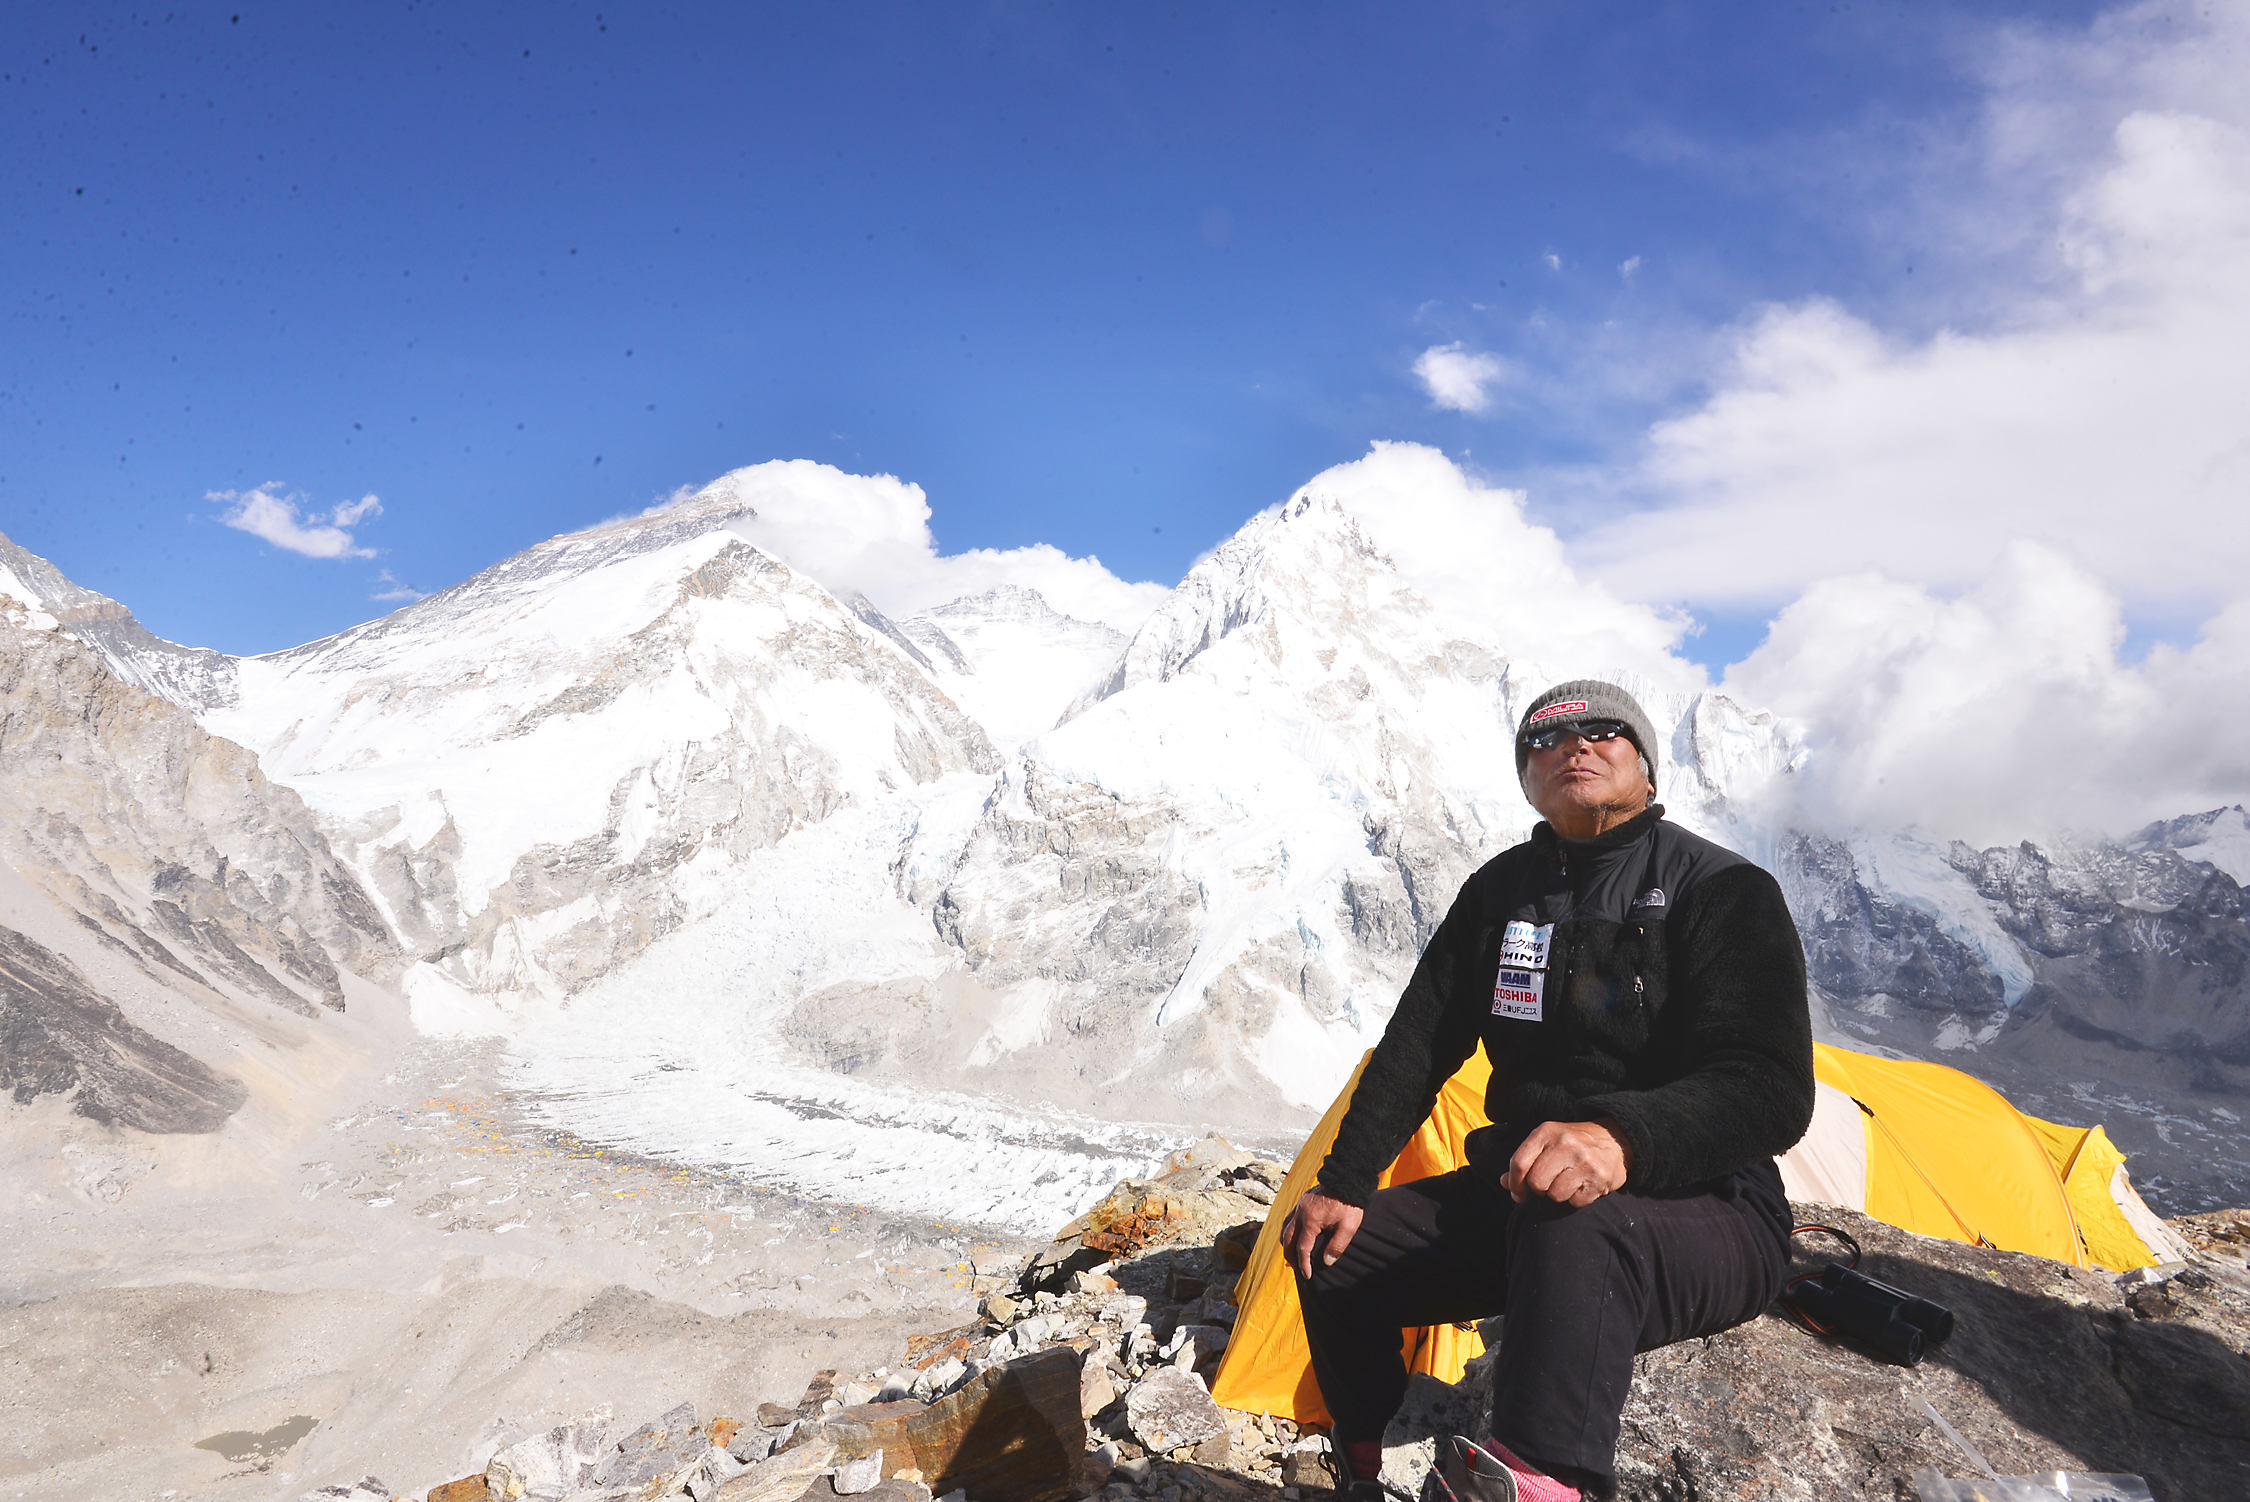 'Three times is enough': Yuichiro Miura poses for a photograph at Mount Everest Base Camp. | PHOTO COURTESY OF MIURA DOLPHINS